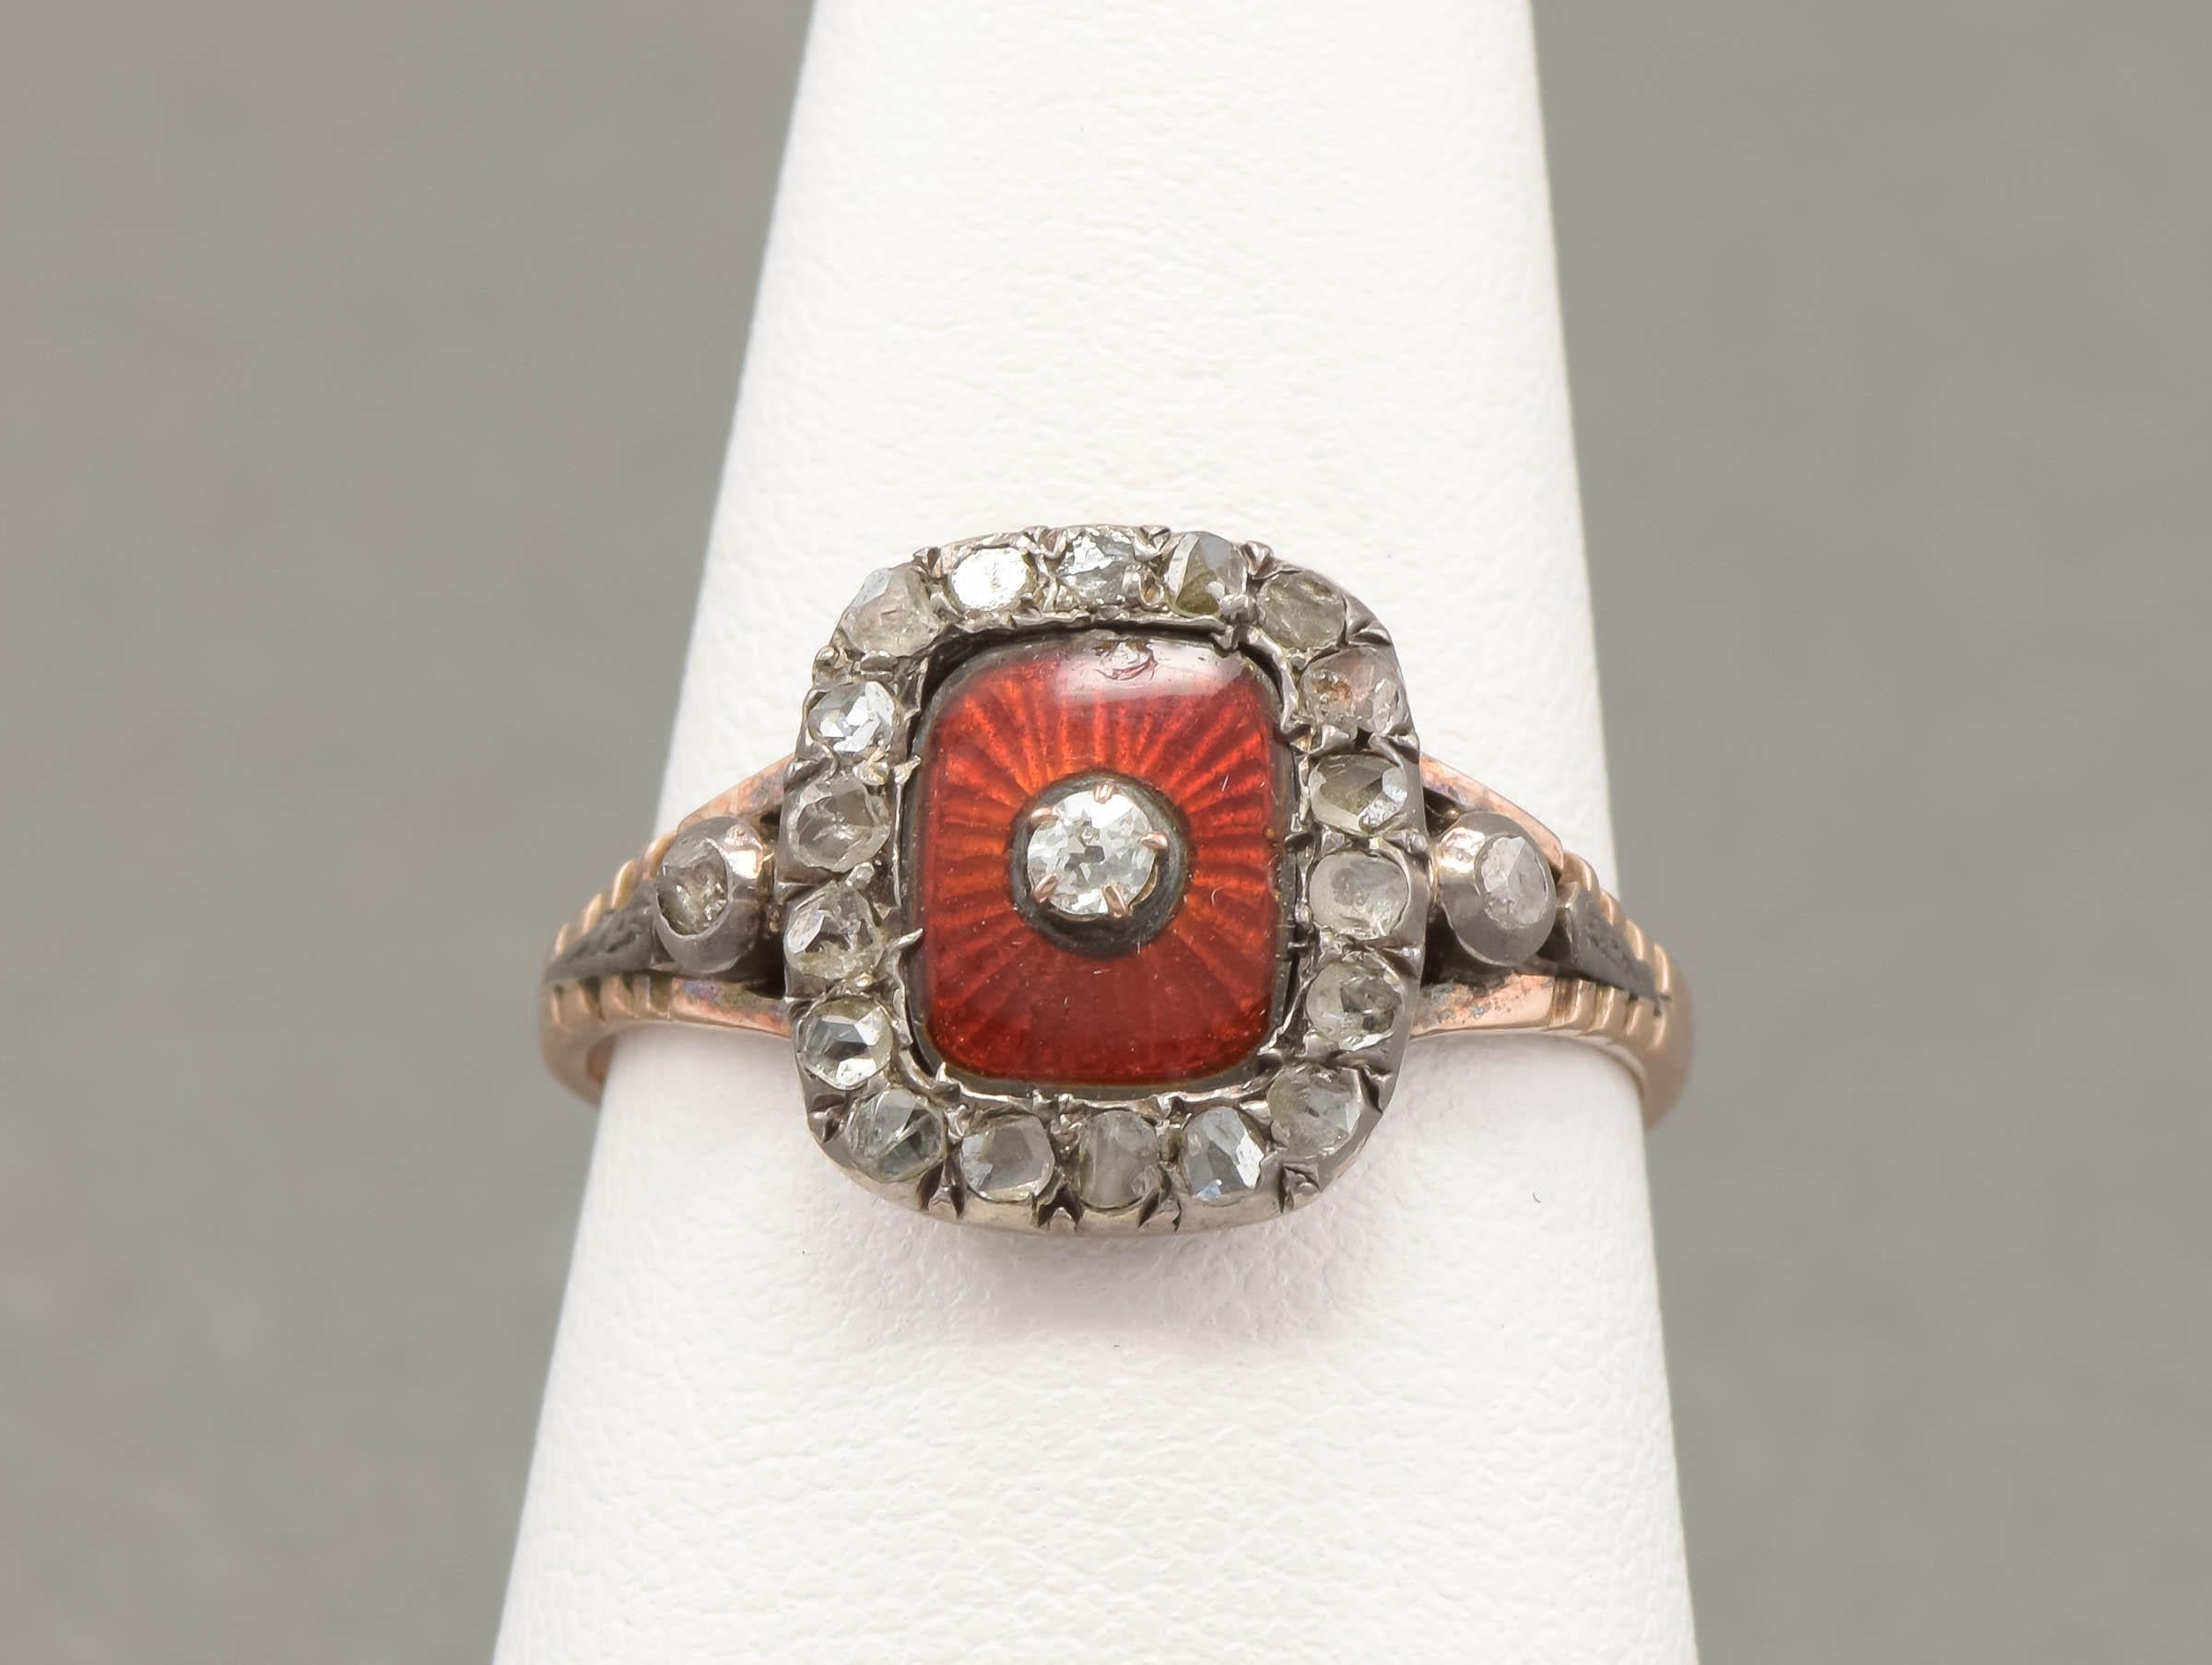 Antique Diamond & Scarlet Guilloche Enamel Ring with Provenance For Sale 1